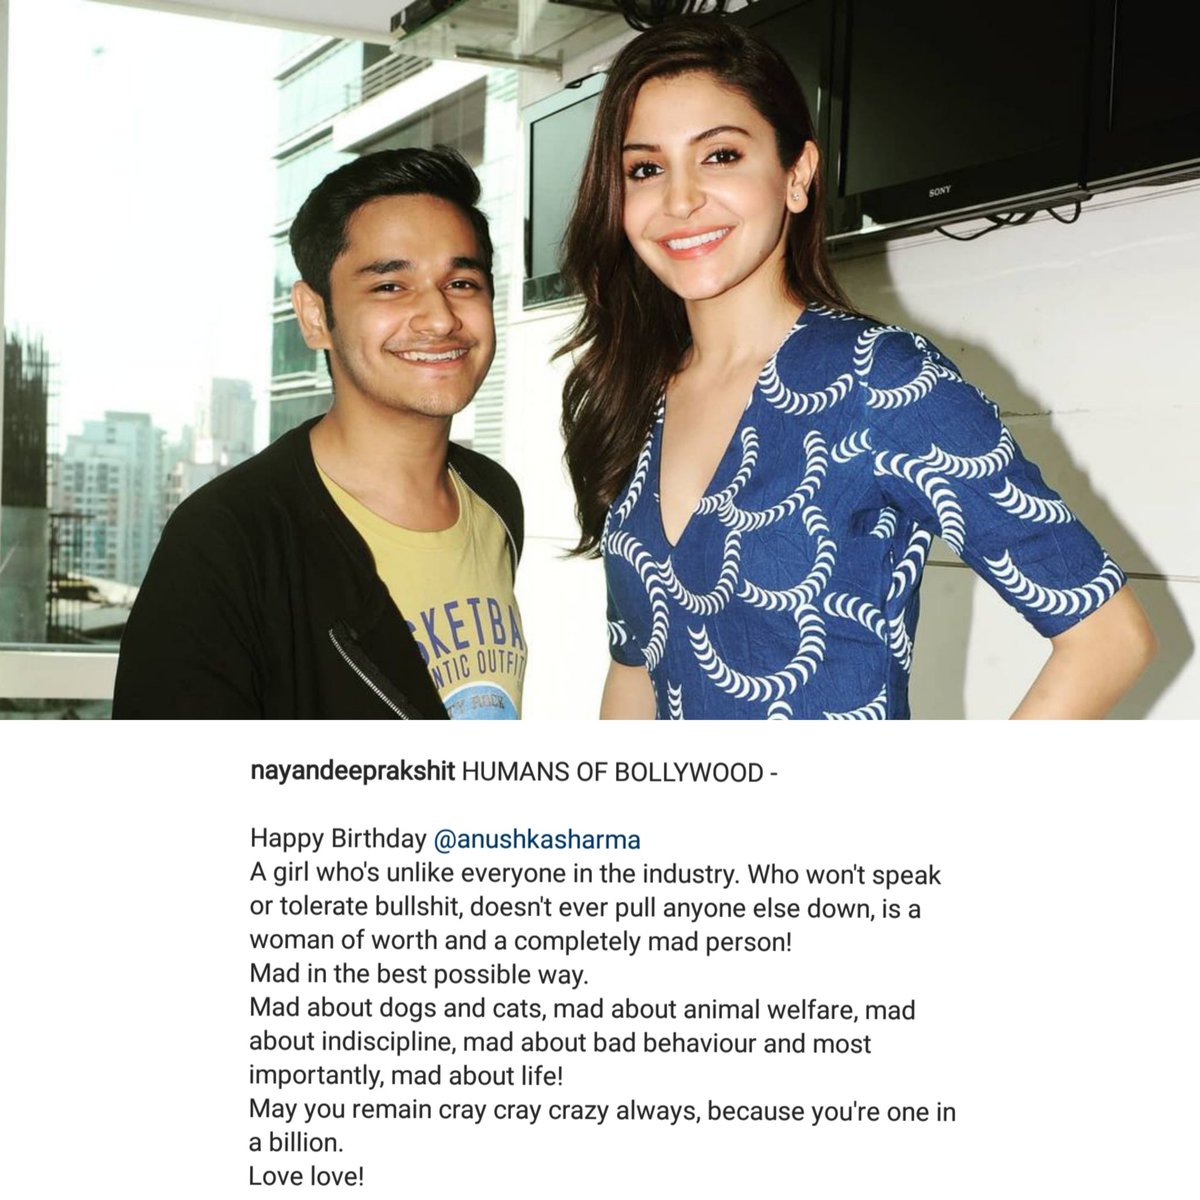 Nayandeep Rakshit via Instagram"A girl who's unlike everyone in the industry. Who won't speak or tolerate bullshit, doesn't ever pull anyone else down, is a woman of worth and a completely mad person!Mad in the best possible way."  #HappyBirthdayAnushkaSharma